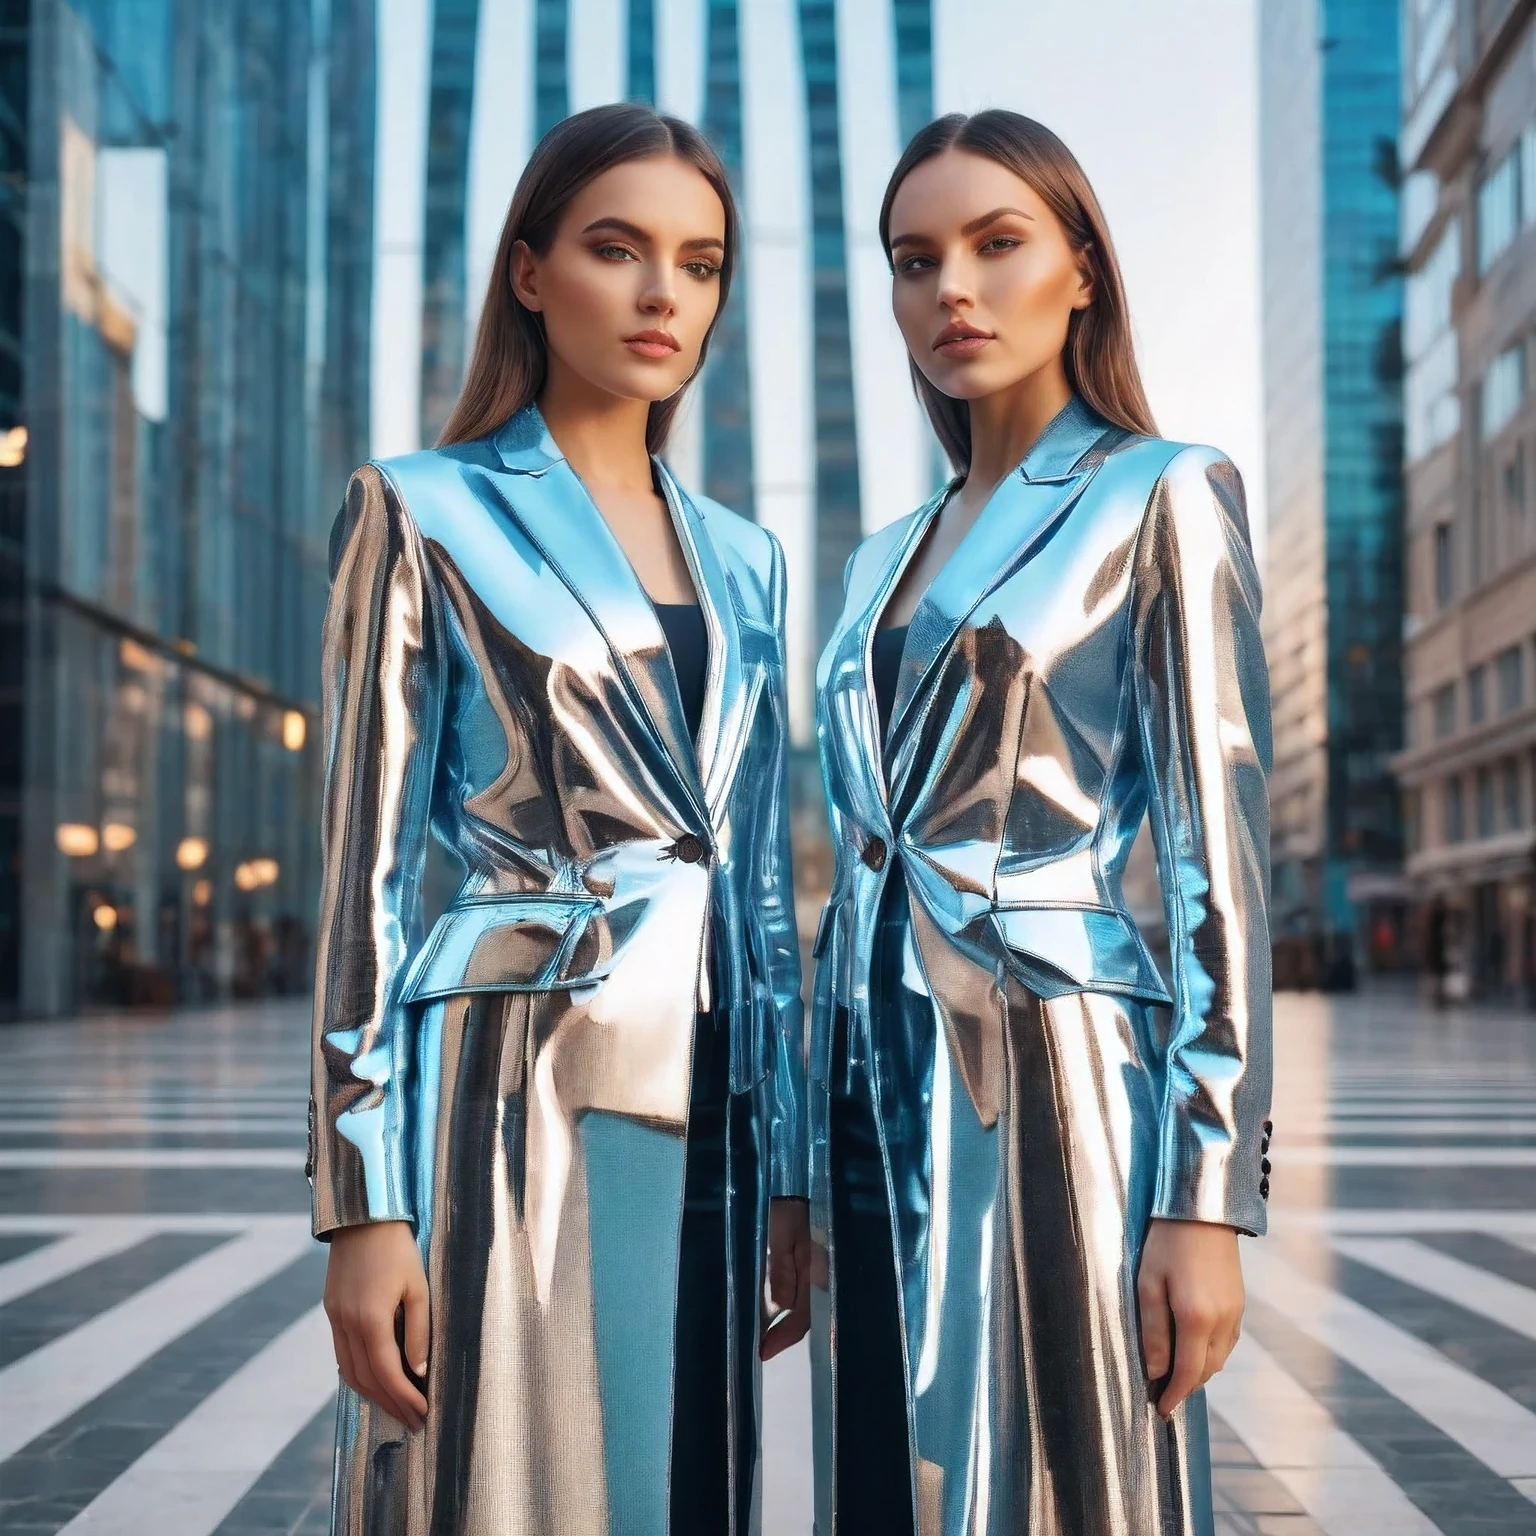 Realistic photo, two twins woman, standig together in symmetrical pose, full shot, beutiful, twins, Imersive symmetrical background of City, wearing identical clothes, they look kije mirror reflection,  whole photo is symmetrical, raw photo, depth of field, 8k